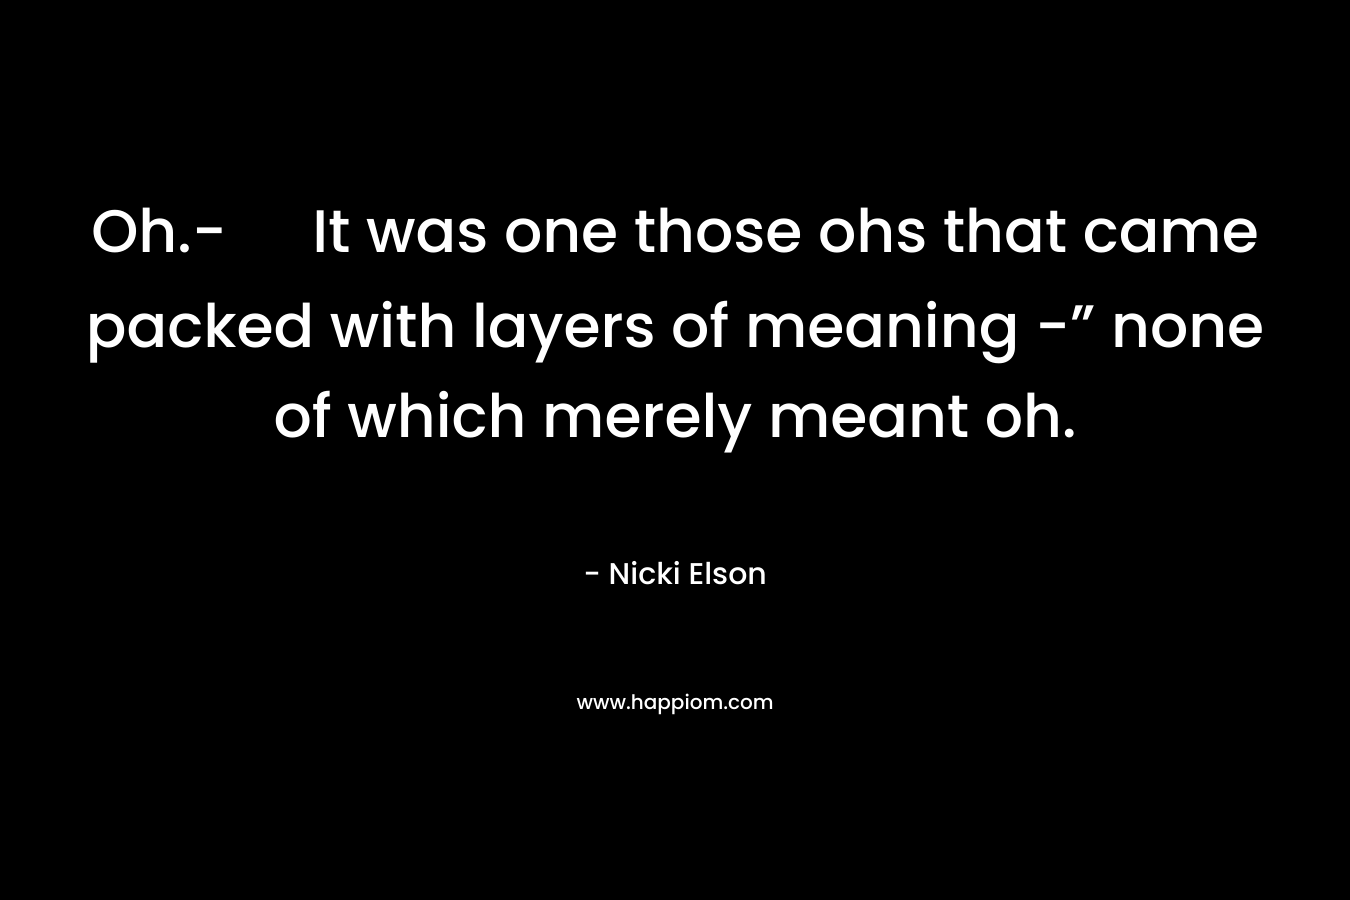 Oh.- It was one those ohs that came packed with layers of meaning -” none of which merely meant oh. – Nicki Elson